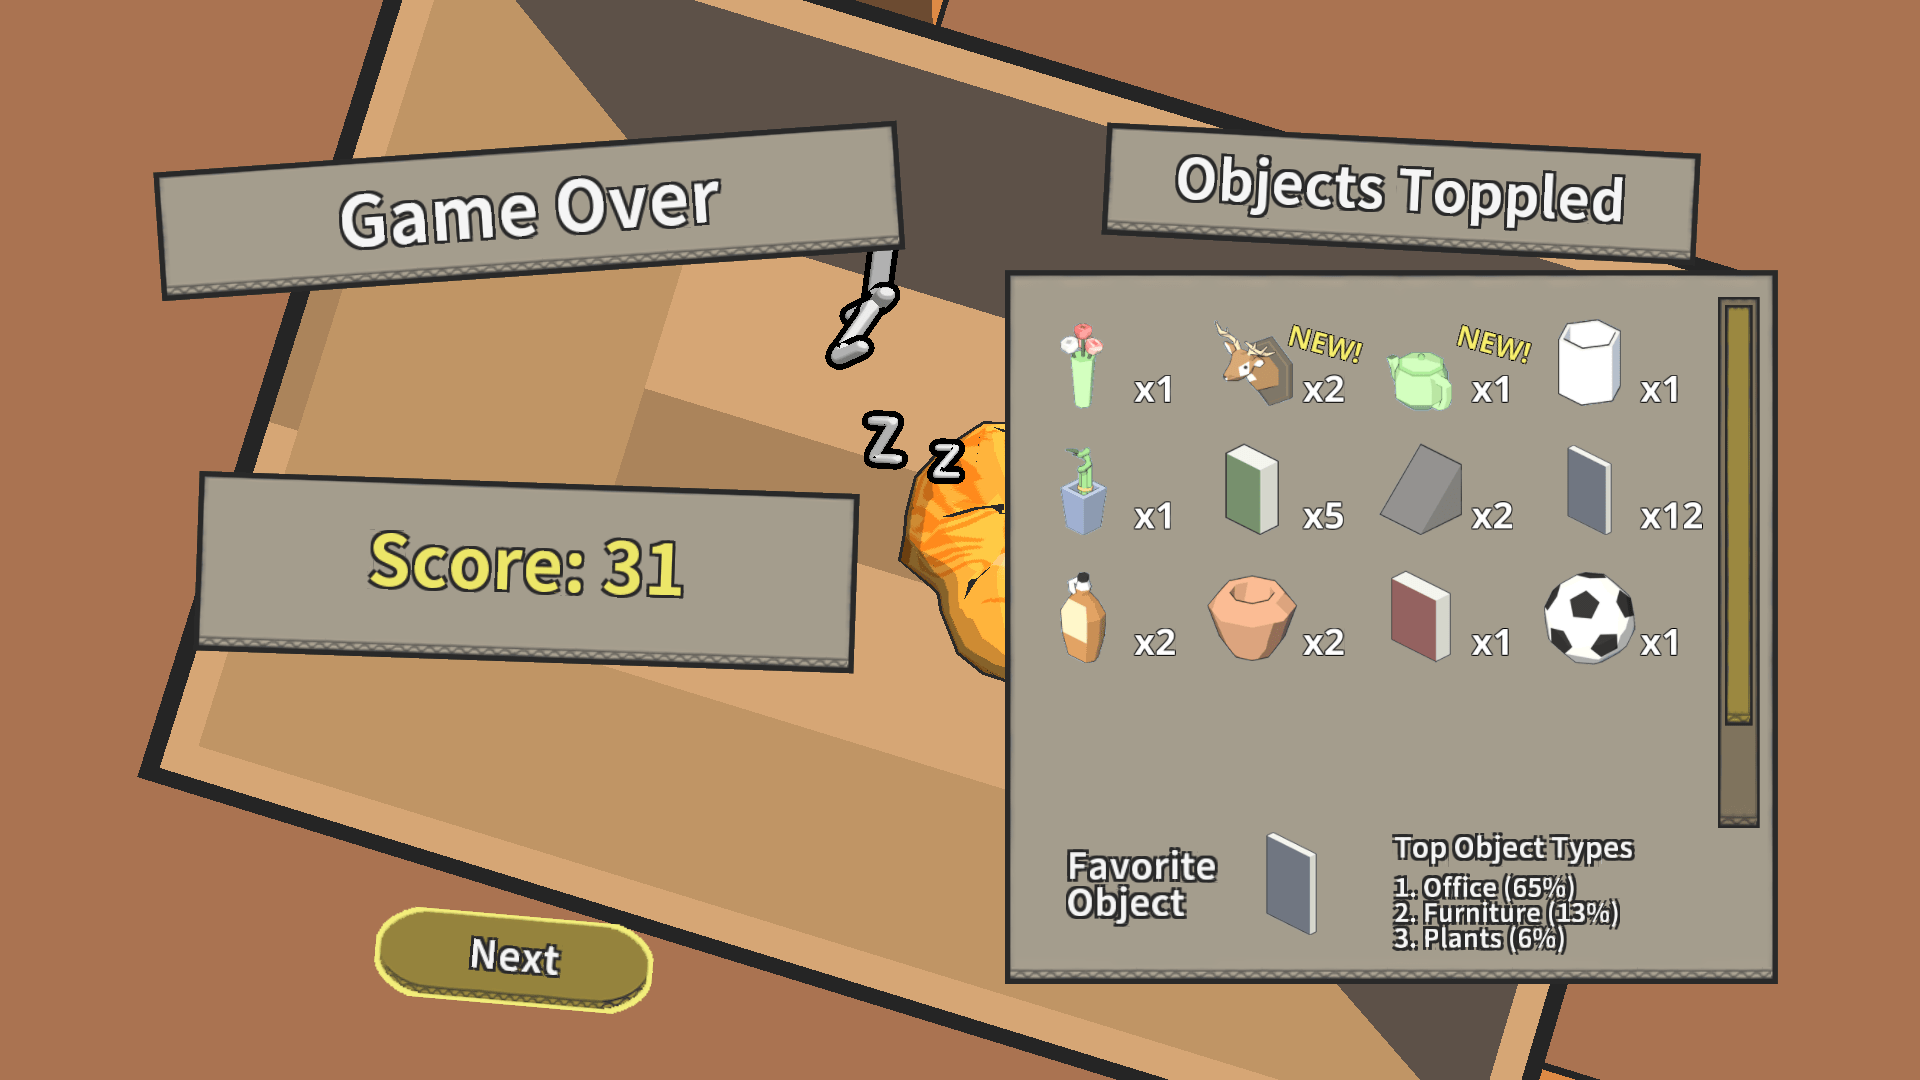 Game over screen showing how many things you've knocked off.